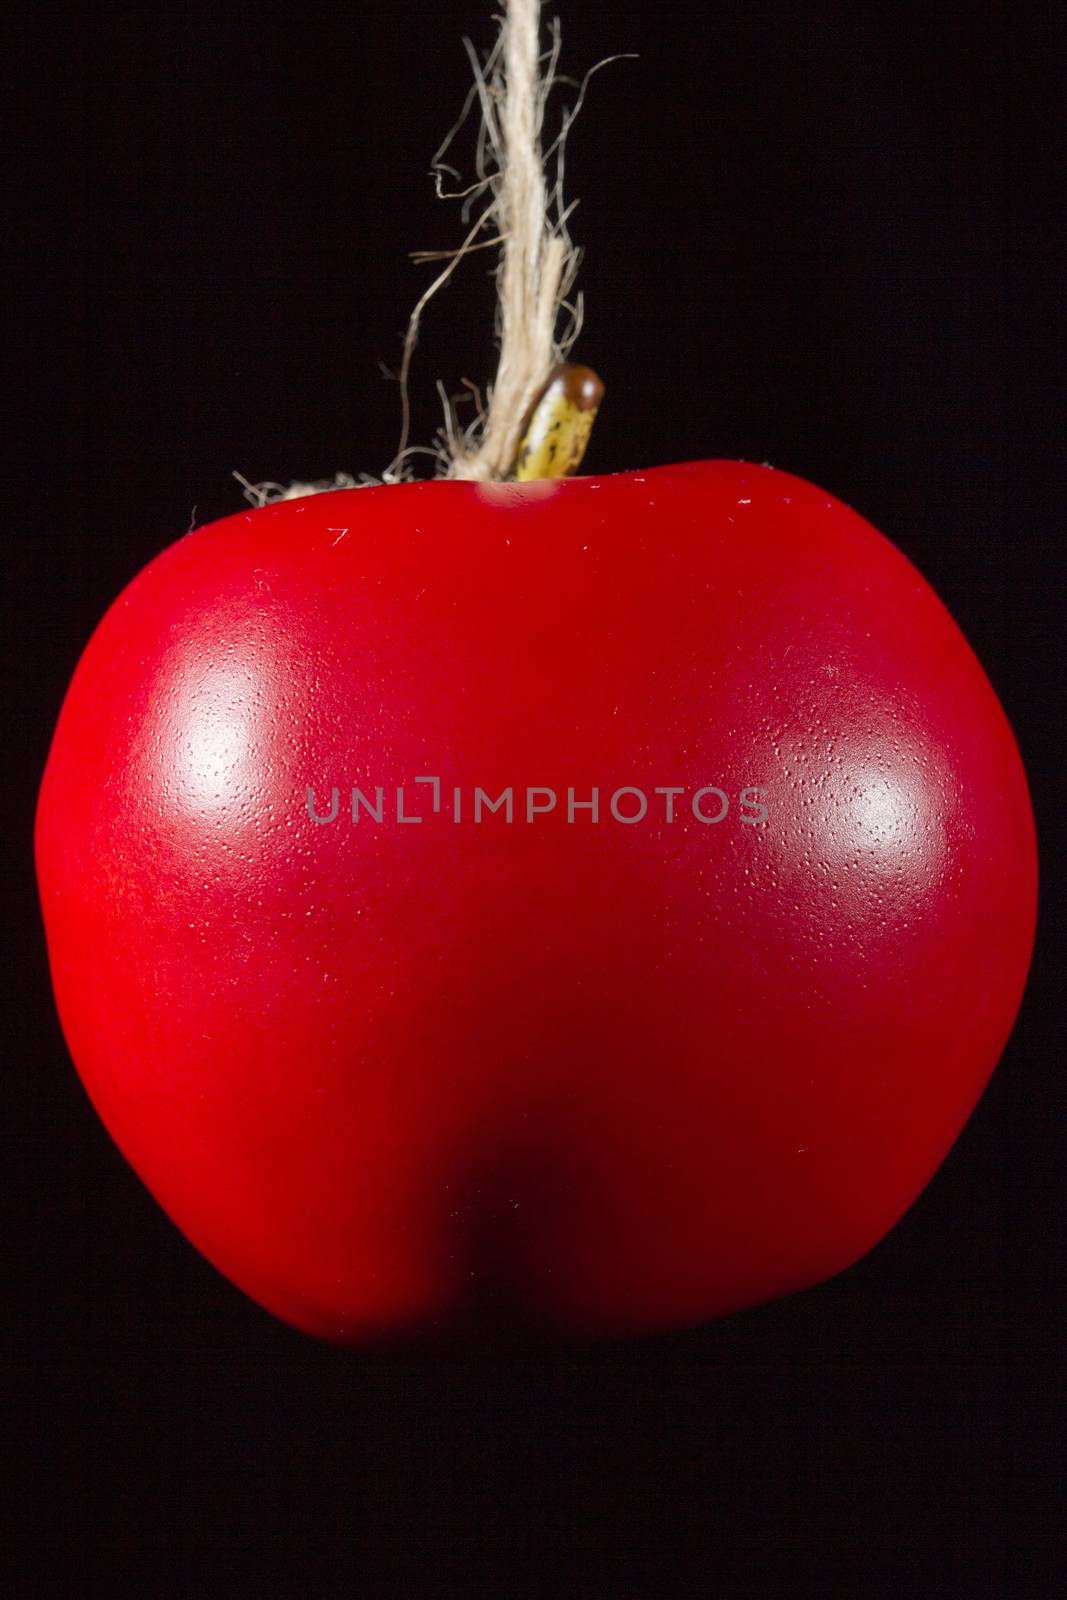 Red ripe apple on a rope on a dark background